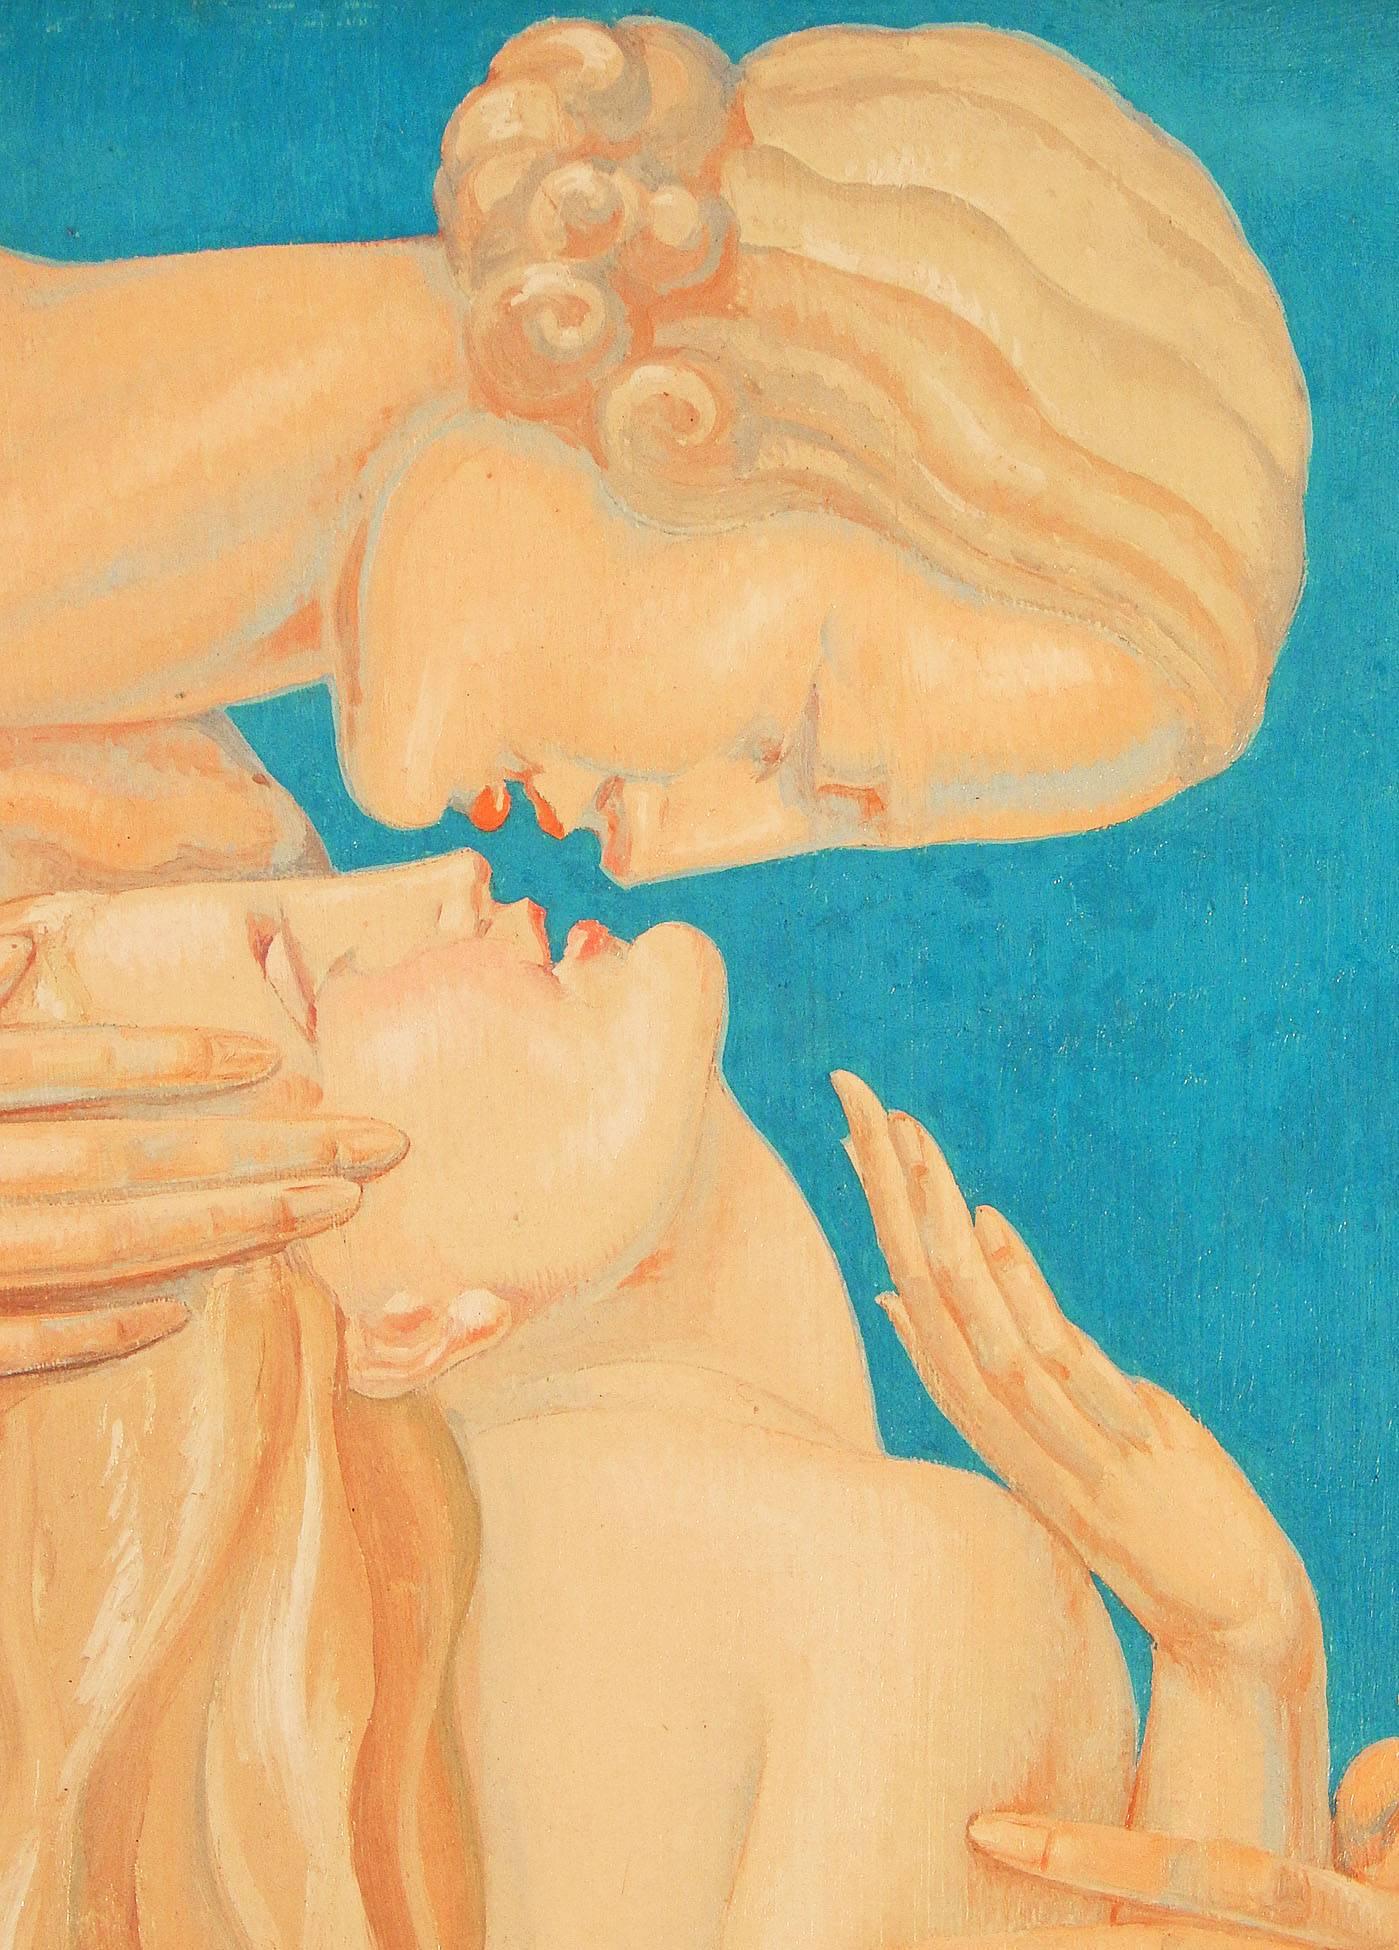 Painted by Louis Rigal, one of America and France's great Art Deco muralists -- responsible for major work at the Waldorf Astoria Hotel and the Chanin Building lobby in New York and the Palmer House in Chicago -- this painting of two female figures